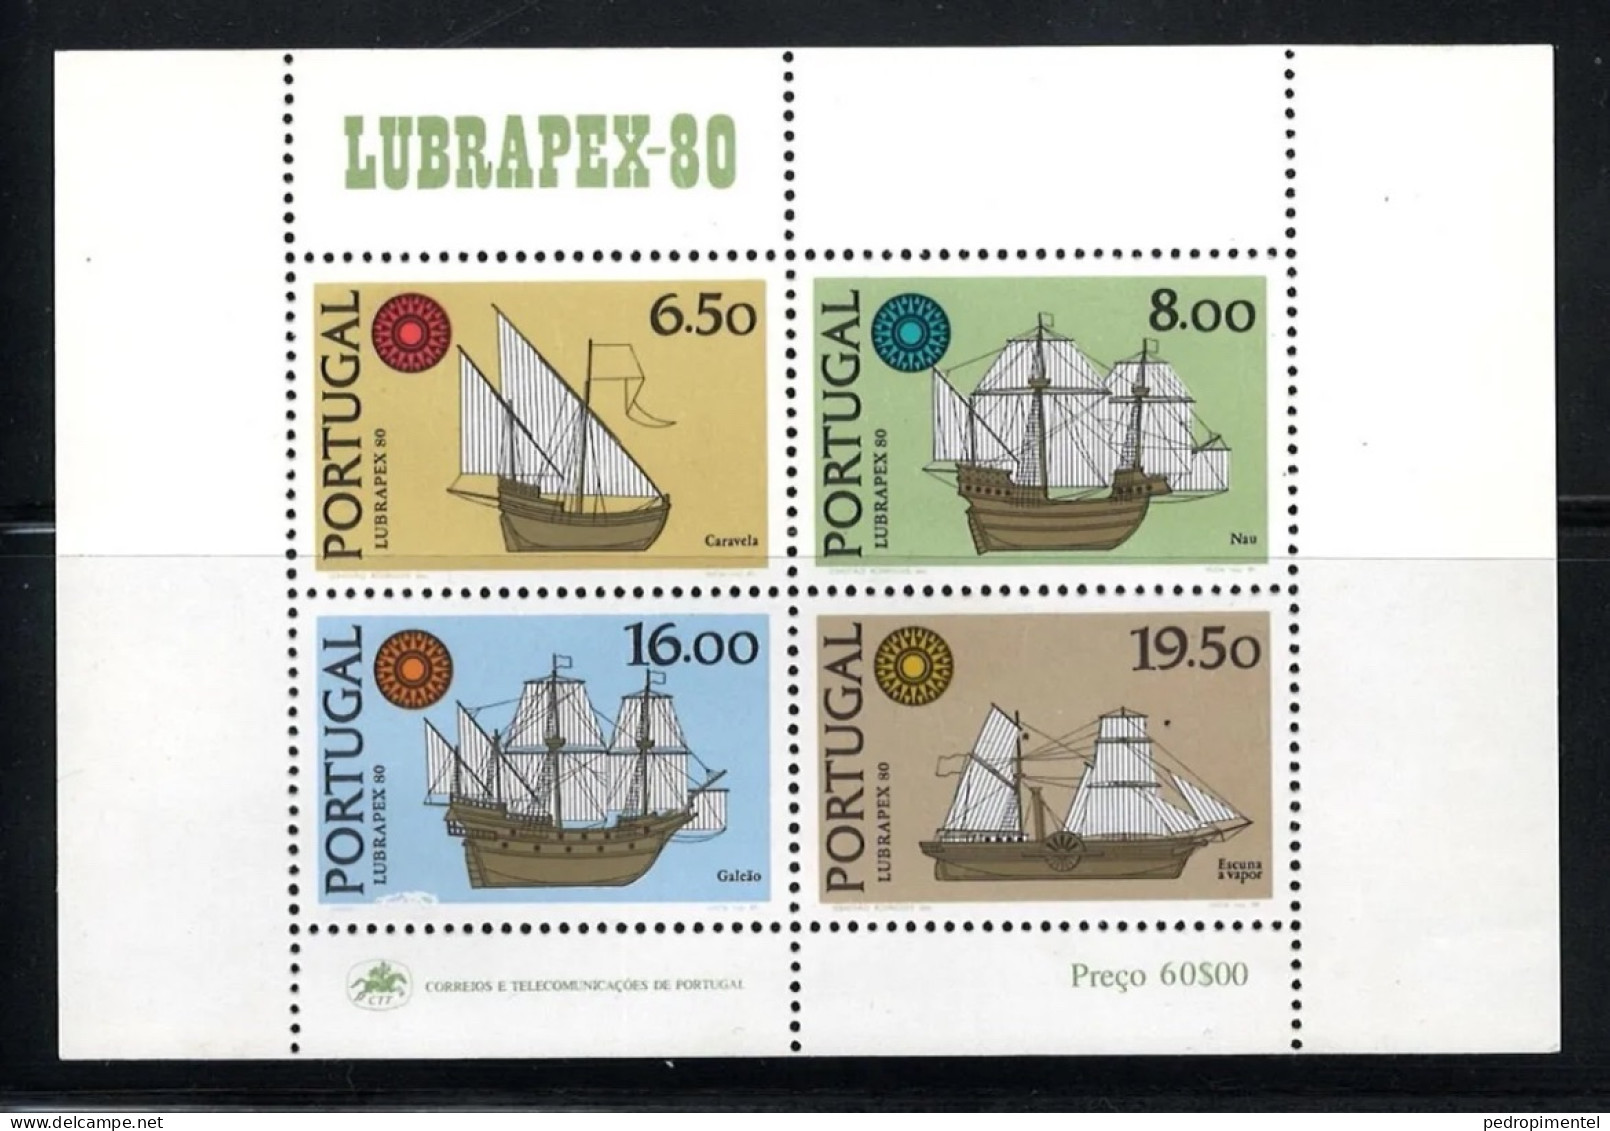 Portugal Stamps 1980 "Lubrapex 80" Condition MNH #1492-1495 (minisheet+stamps) - Neufs